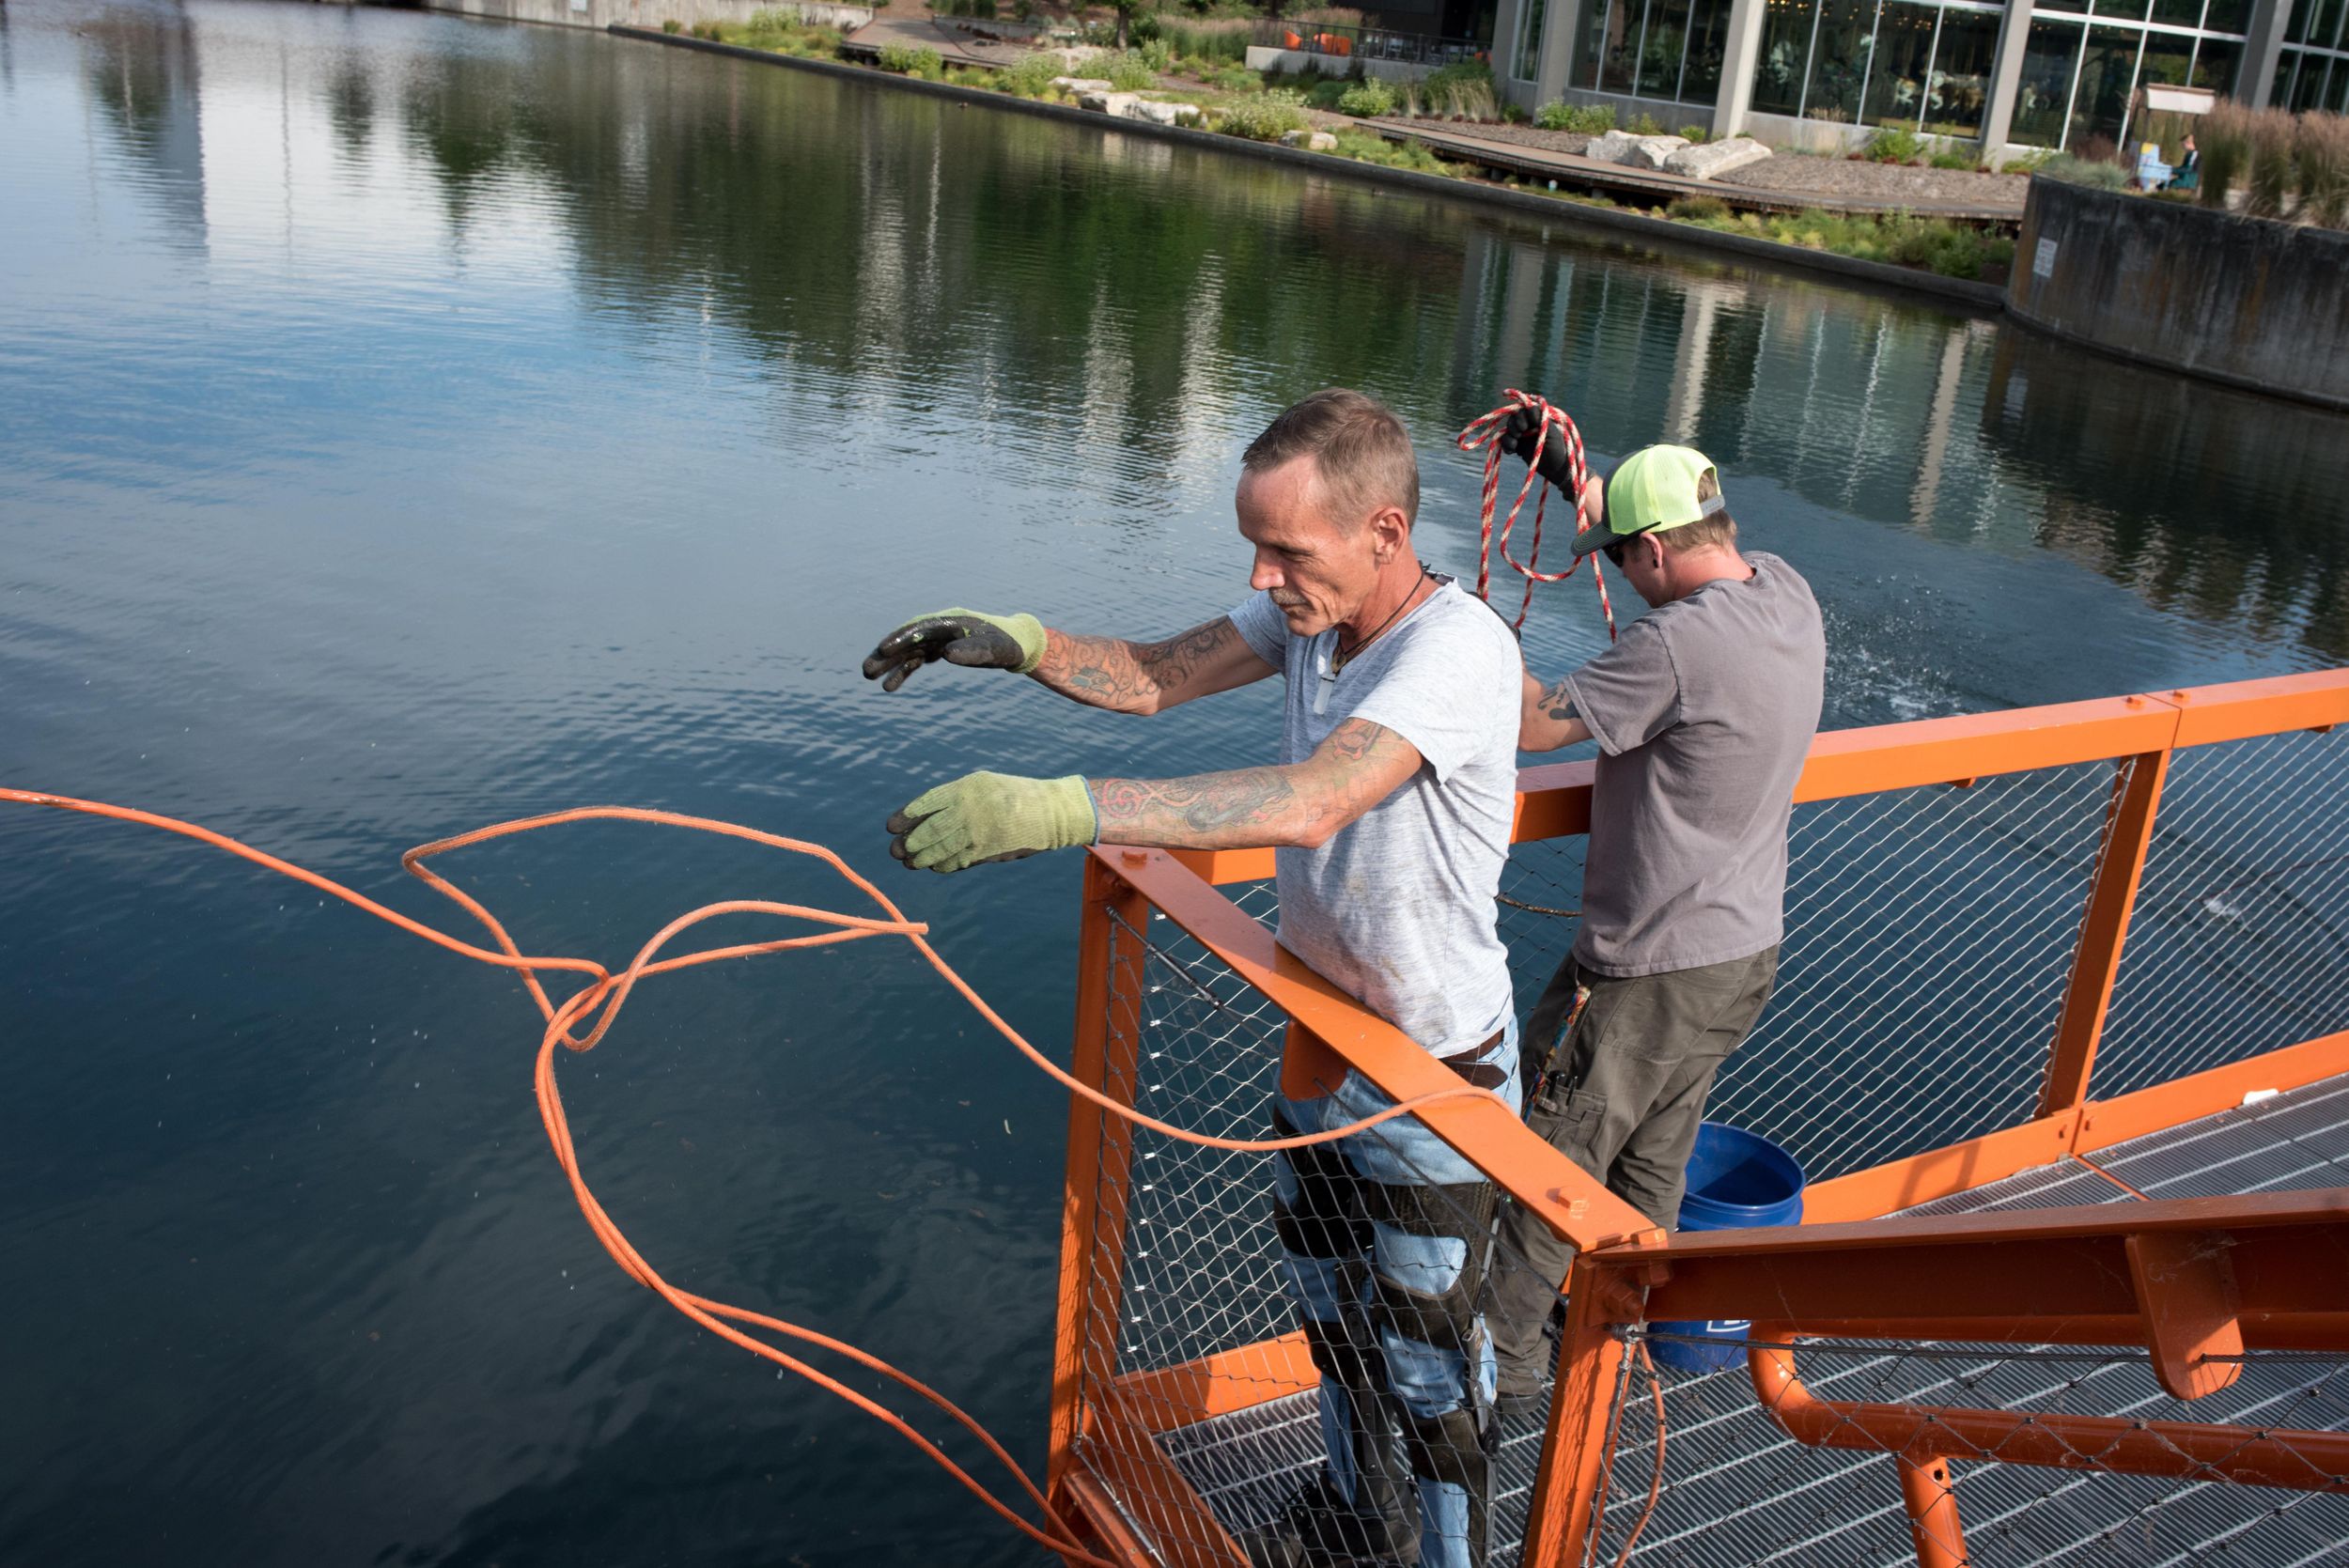 Popularity of magnet fishing grows in Spokane despite muddy legal, ethical  waters